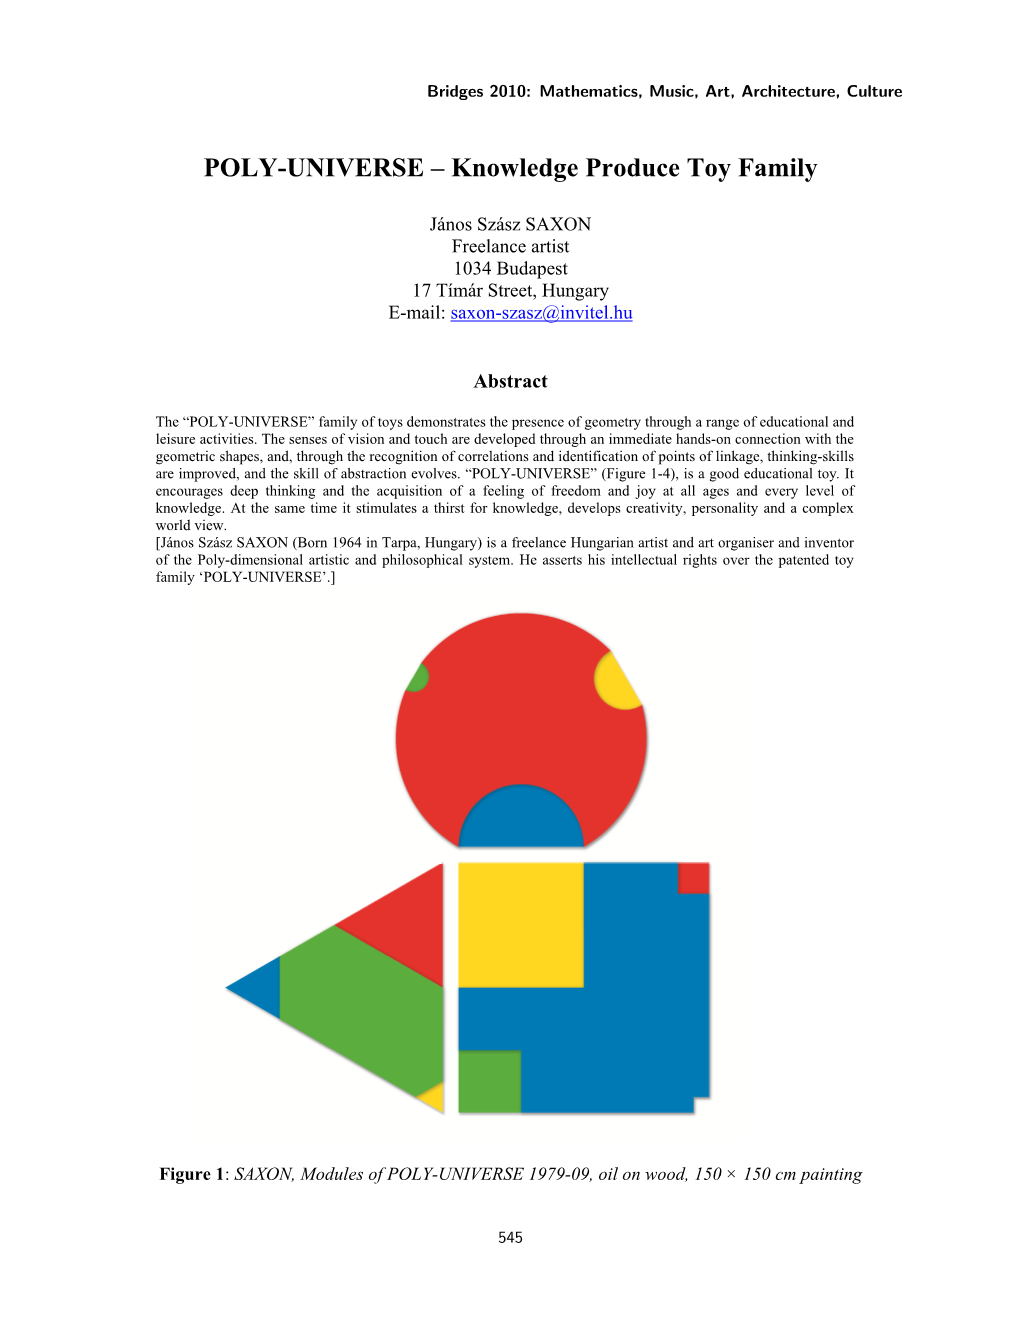 POLY-UNIVERSE – Knowledge Produce Toy Family